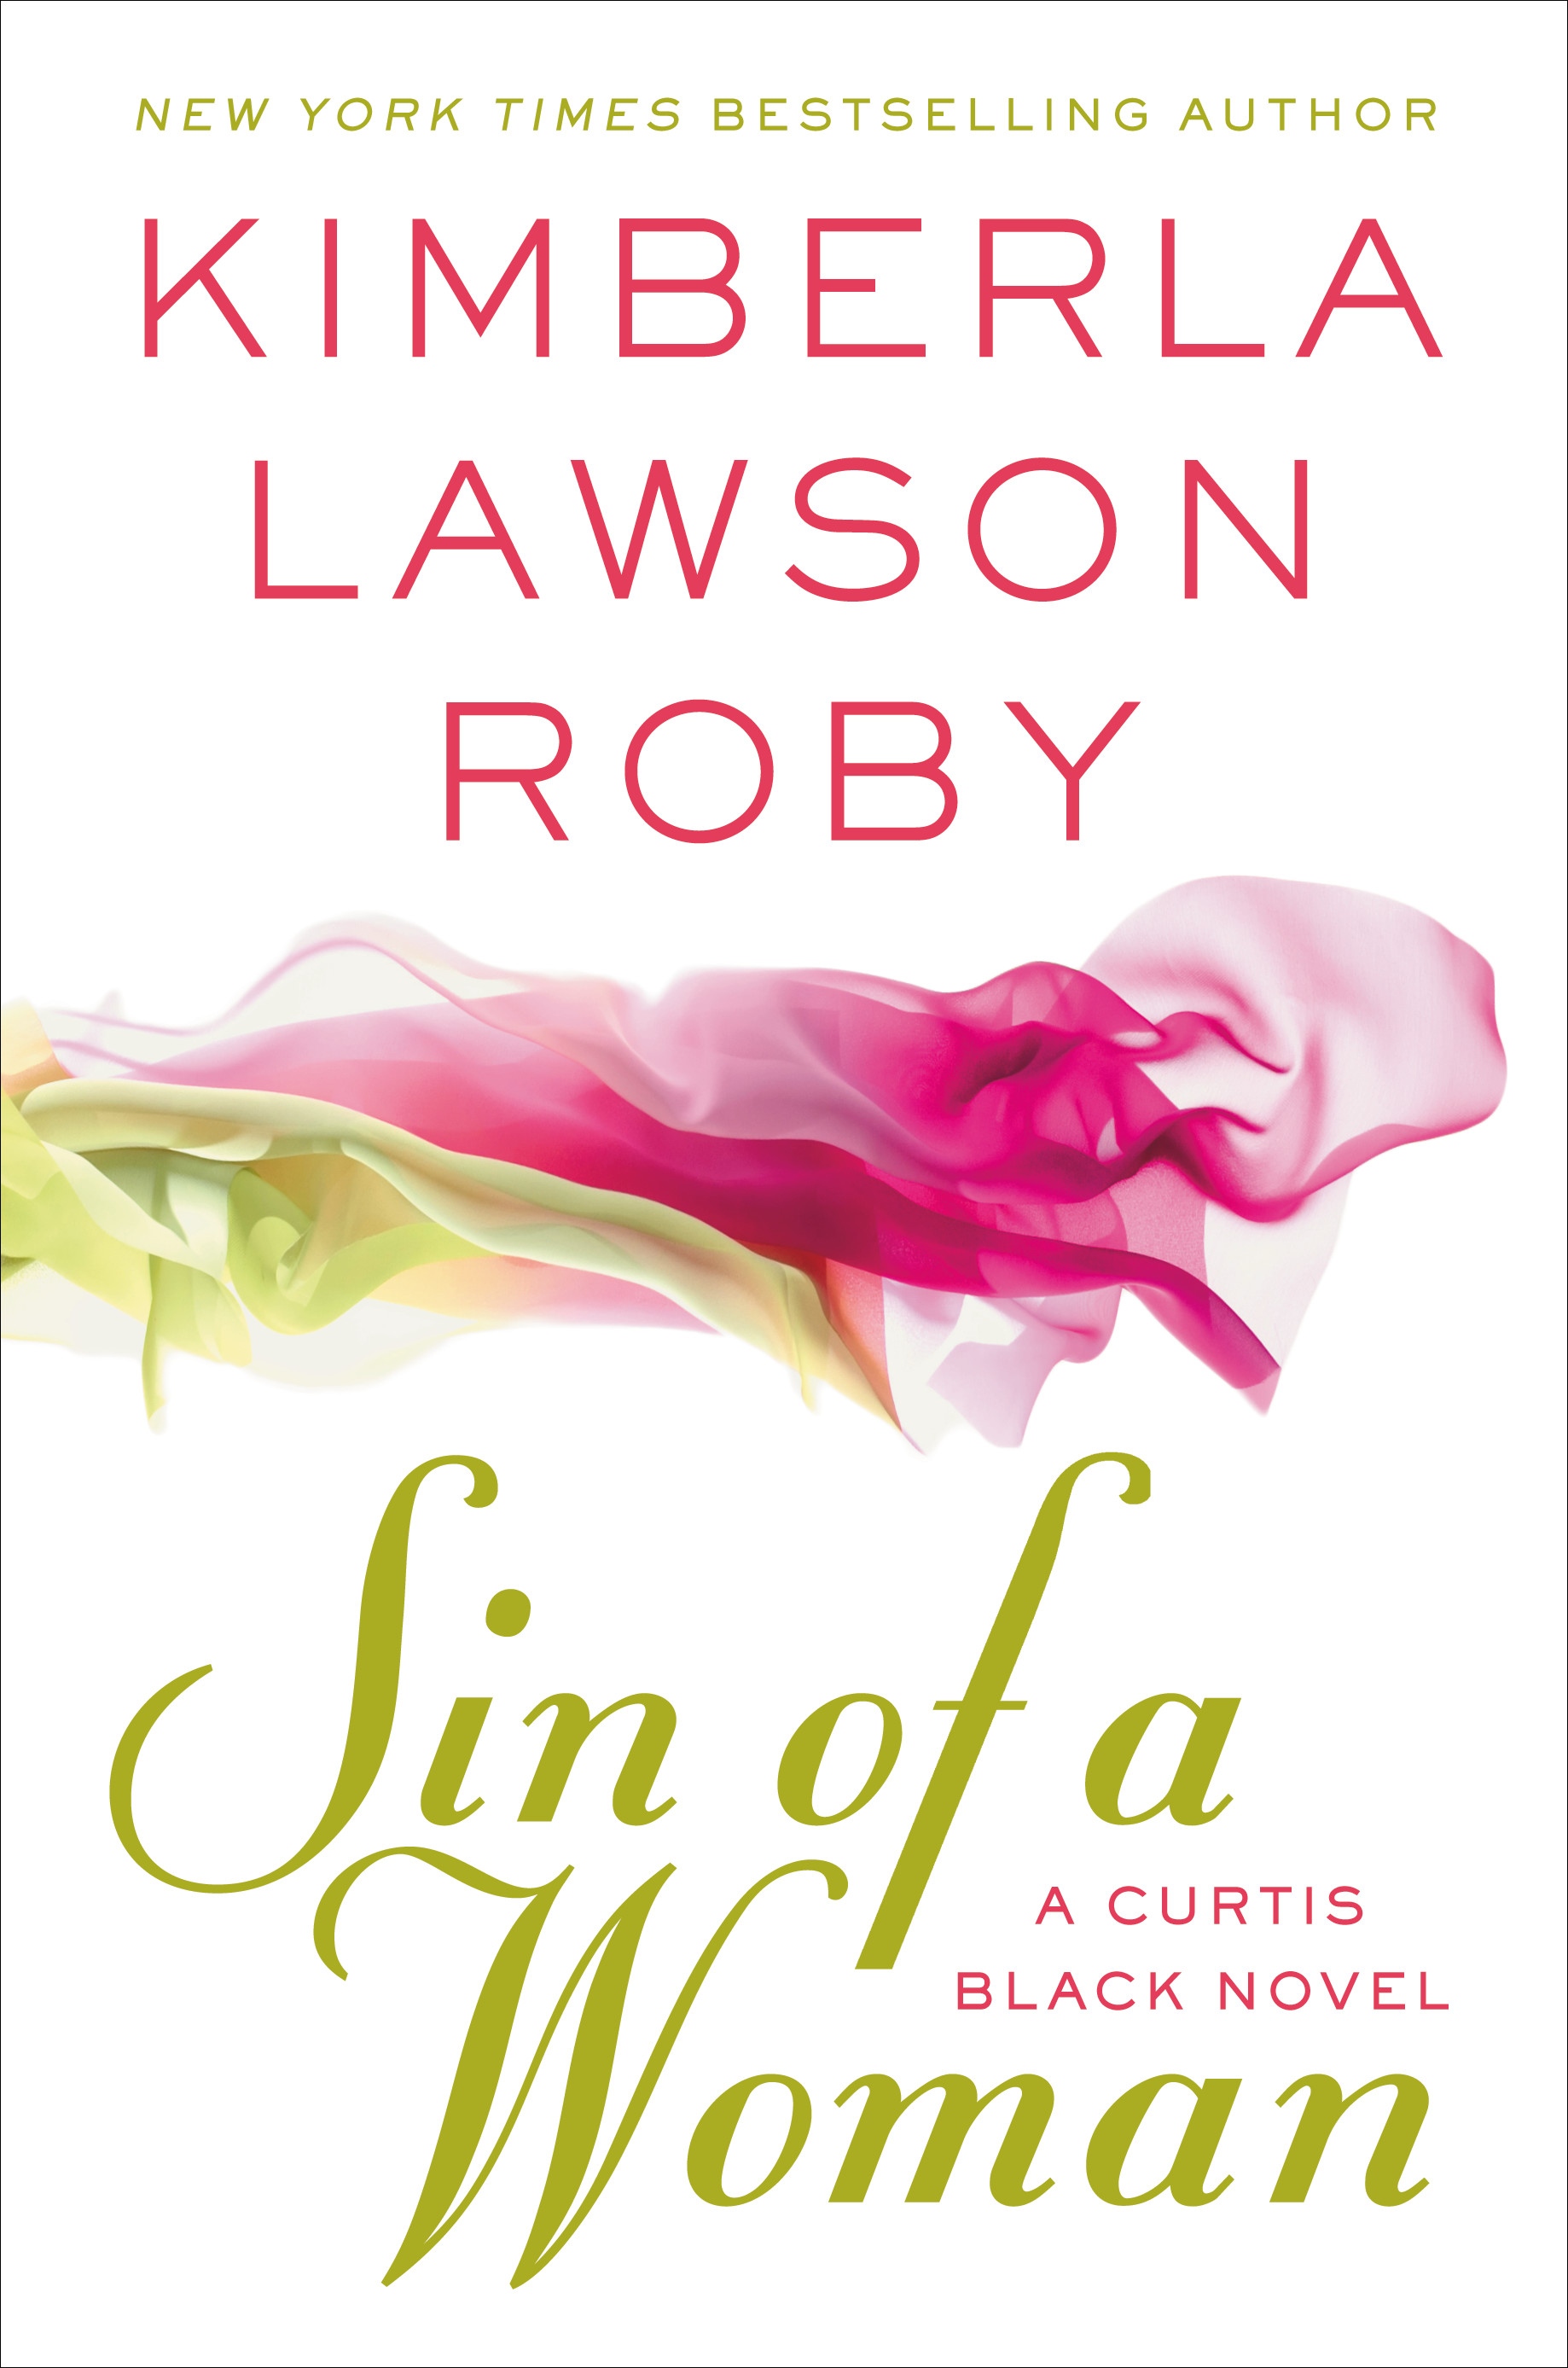 Kimberla Lawson Roby's 'Sin of a Woman' is rock solid summer read